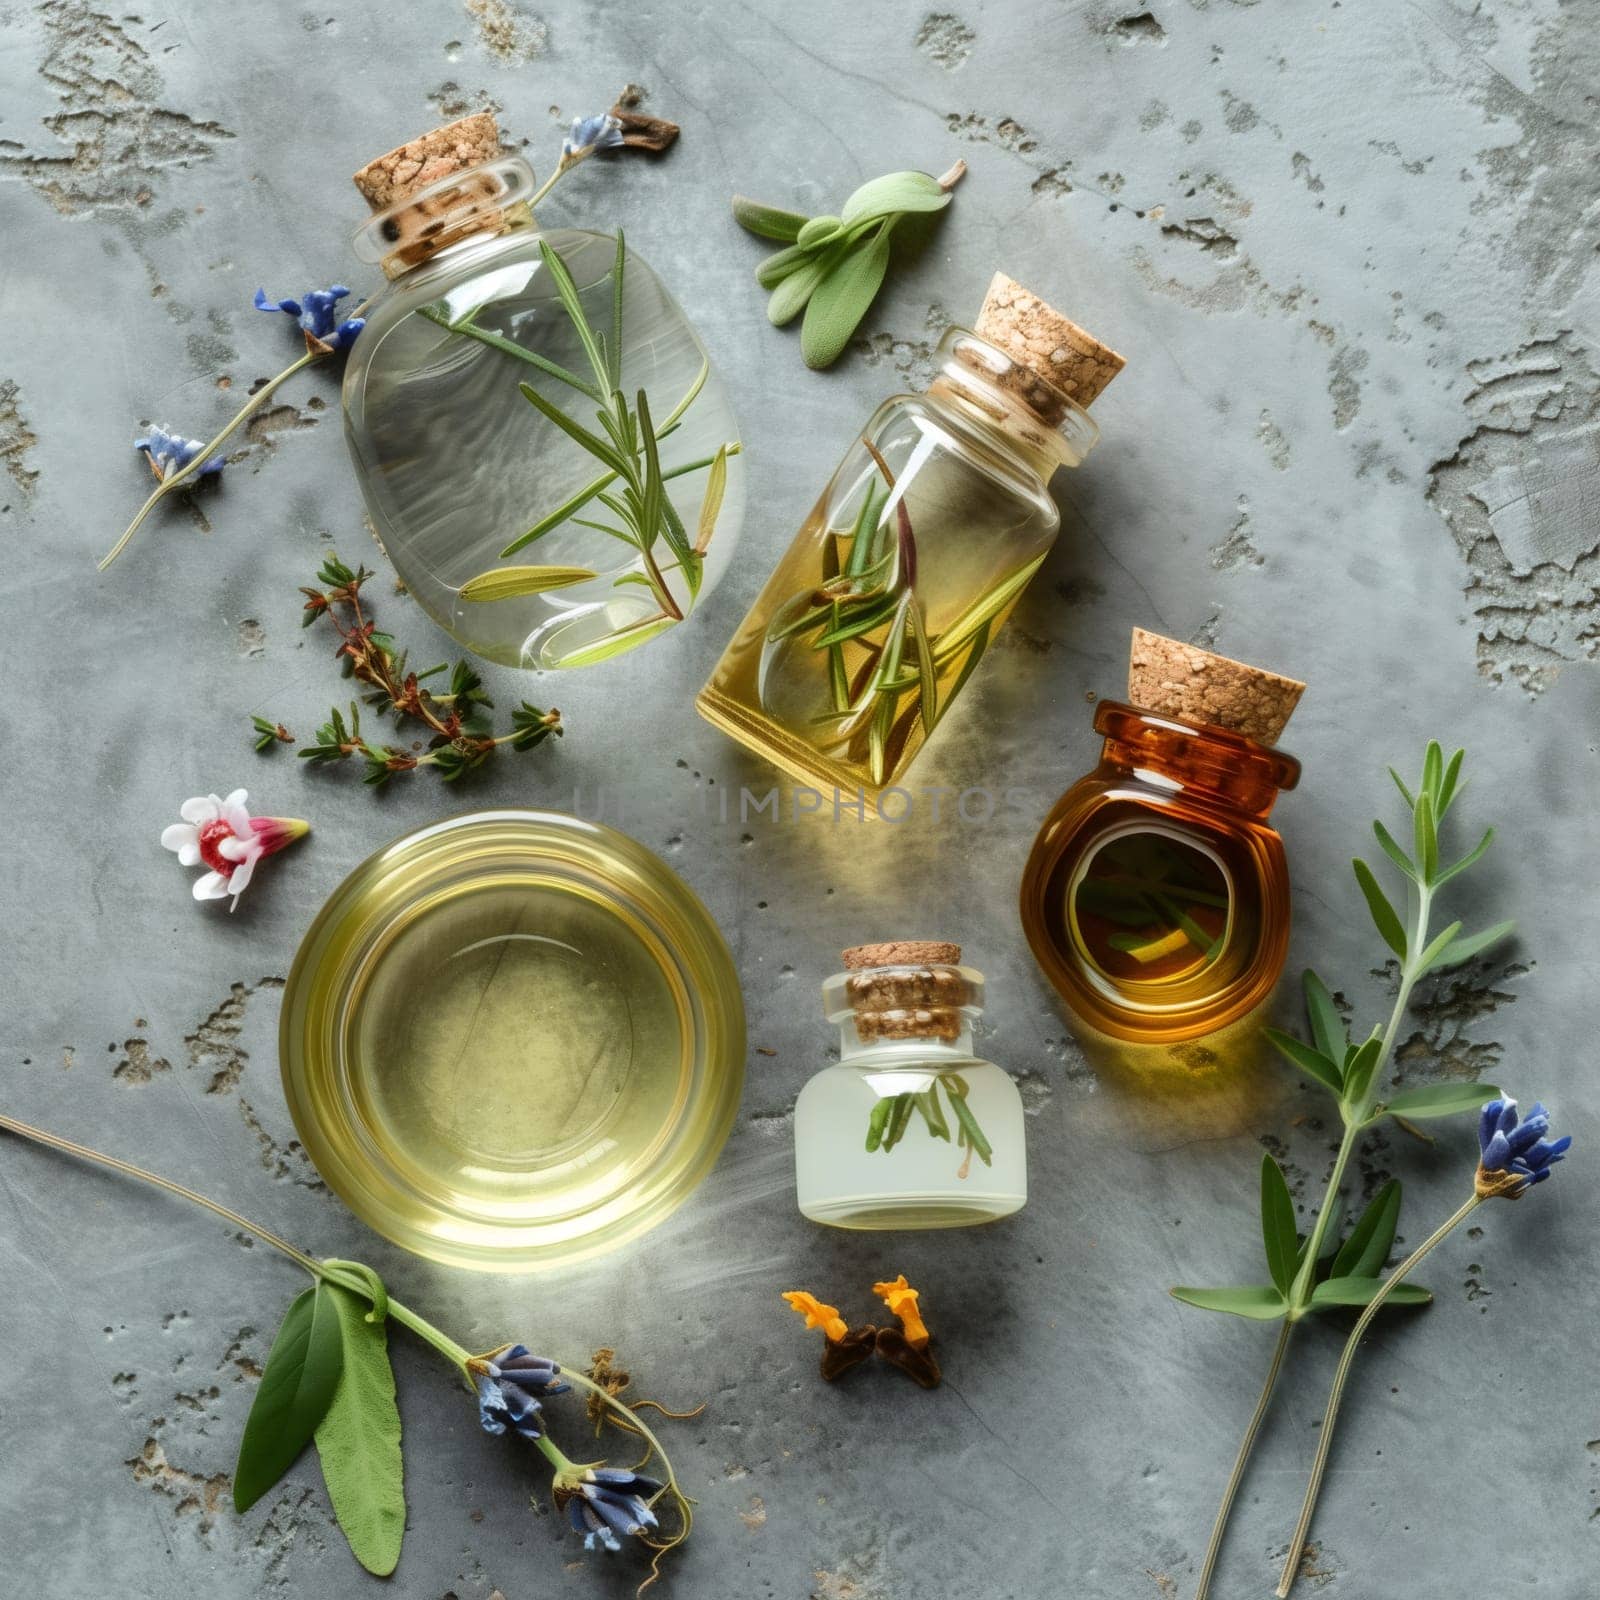 Five glass jars with aromatic oils, medicinal flowers and rosemary branches lie on a gray background, flat lay close-up.